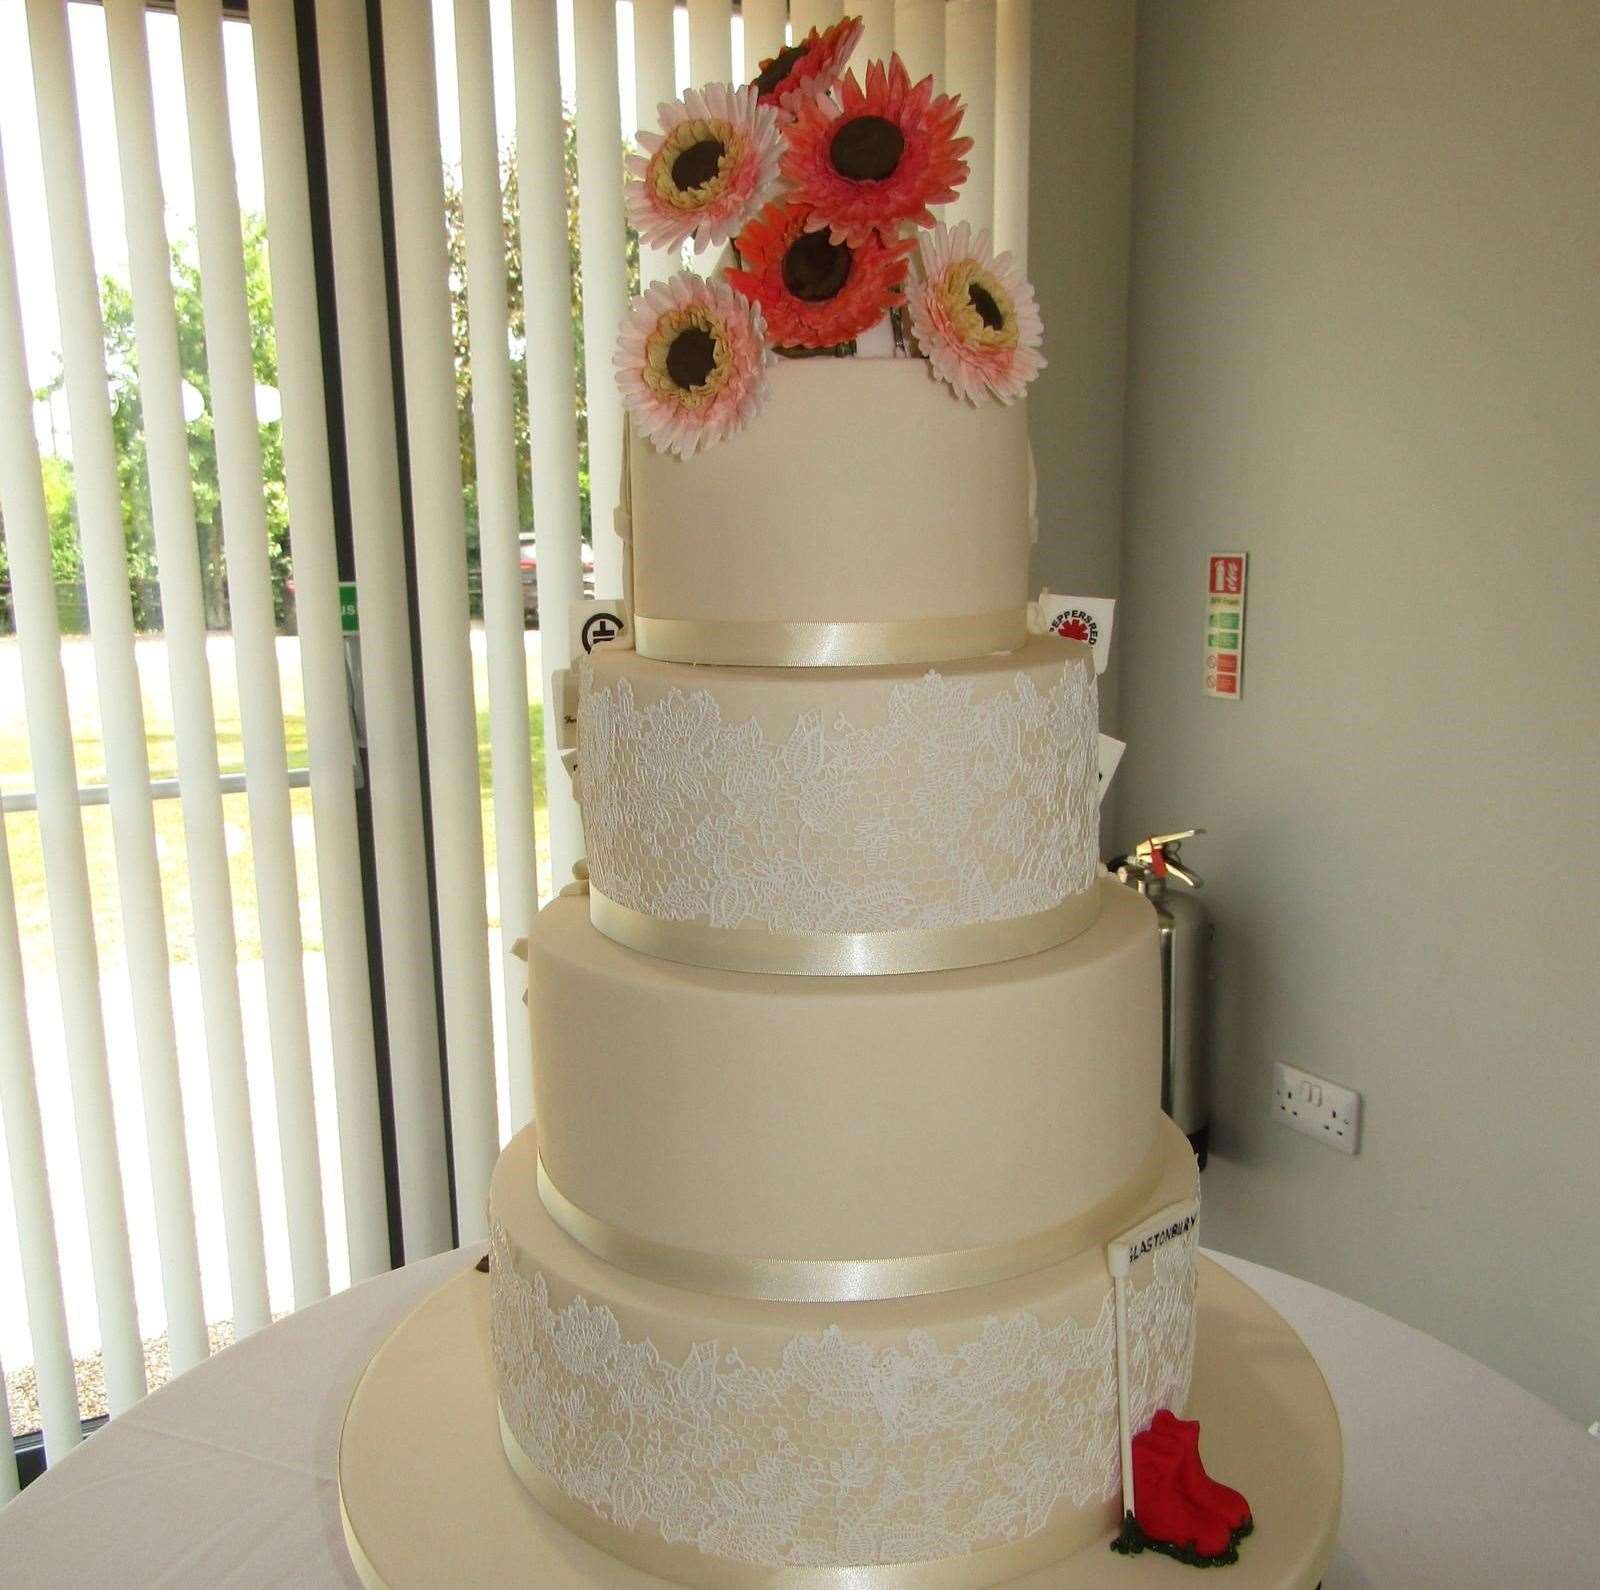 Drop in to The Wedding Experience show in Detling to get a slice of the action!